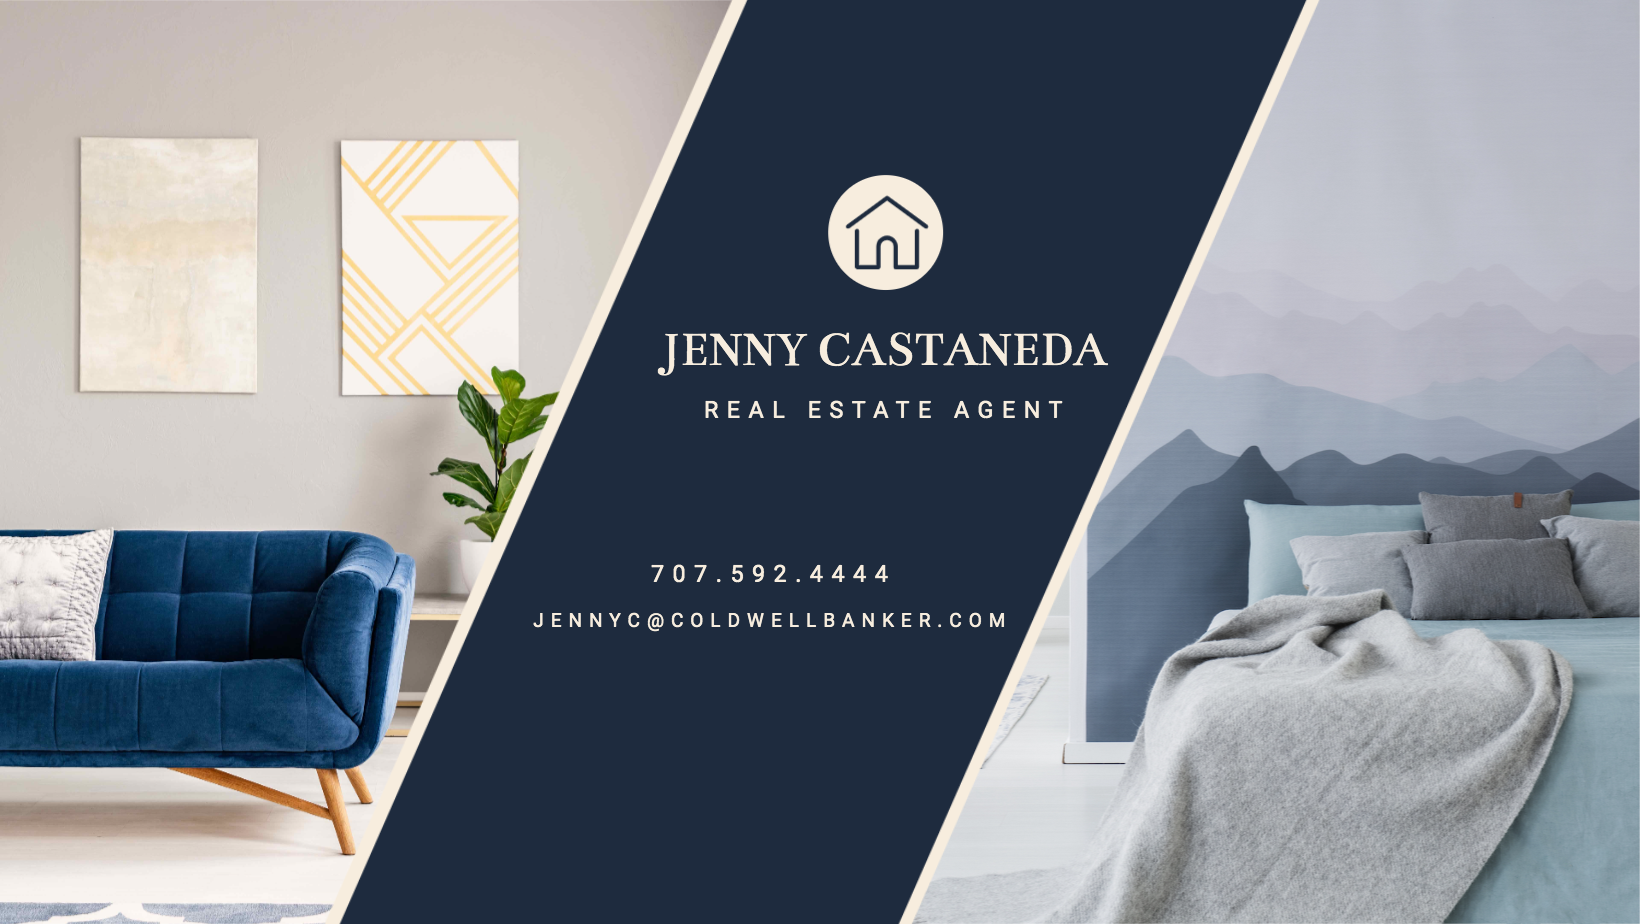 Jenny Castaneda Team - Coldwell Banker Solano Pacific